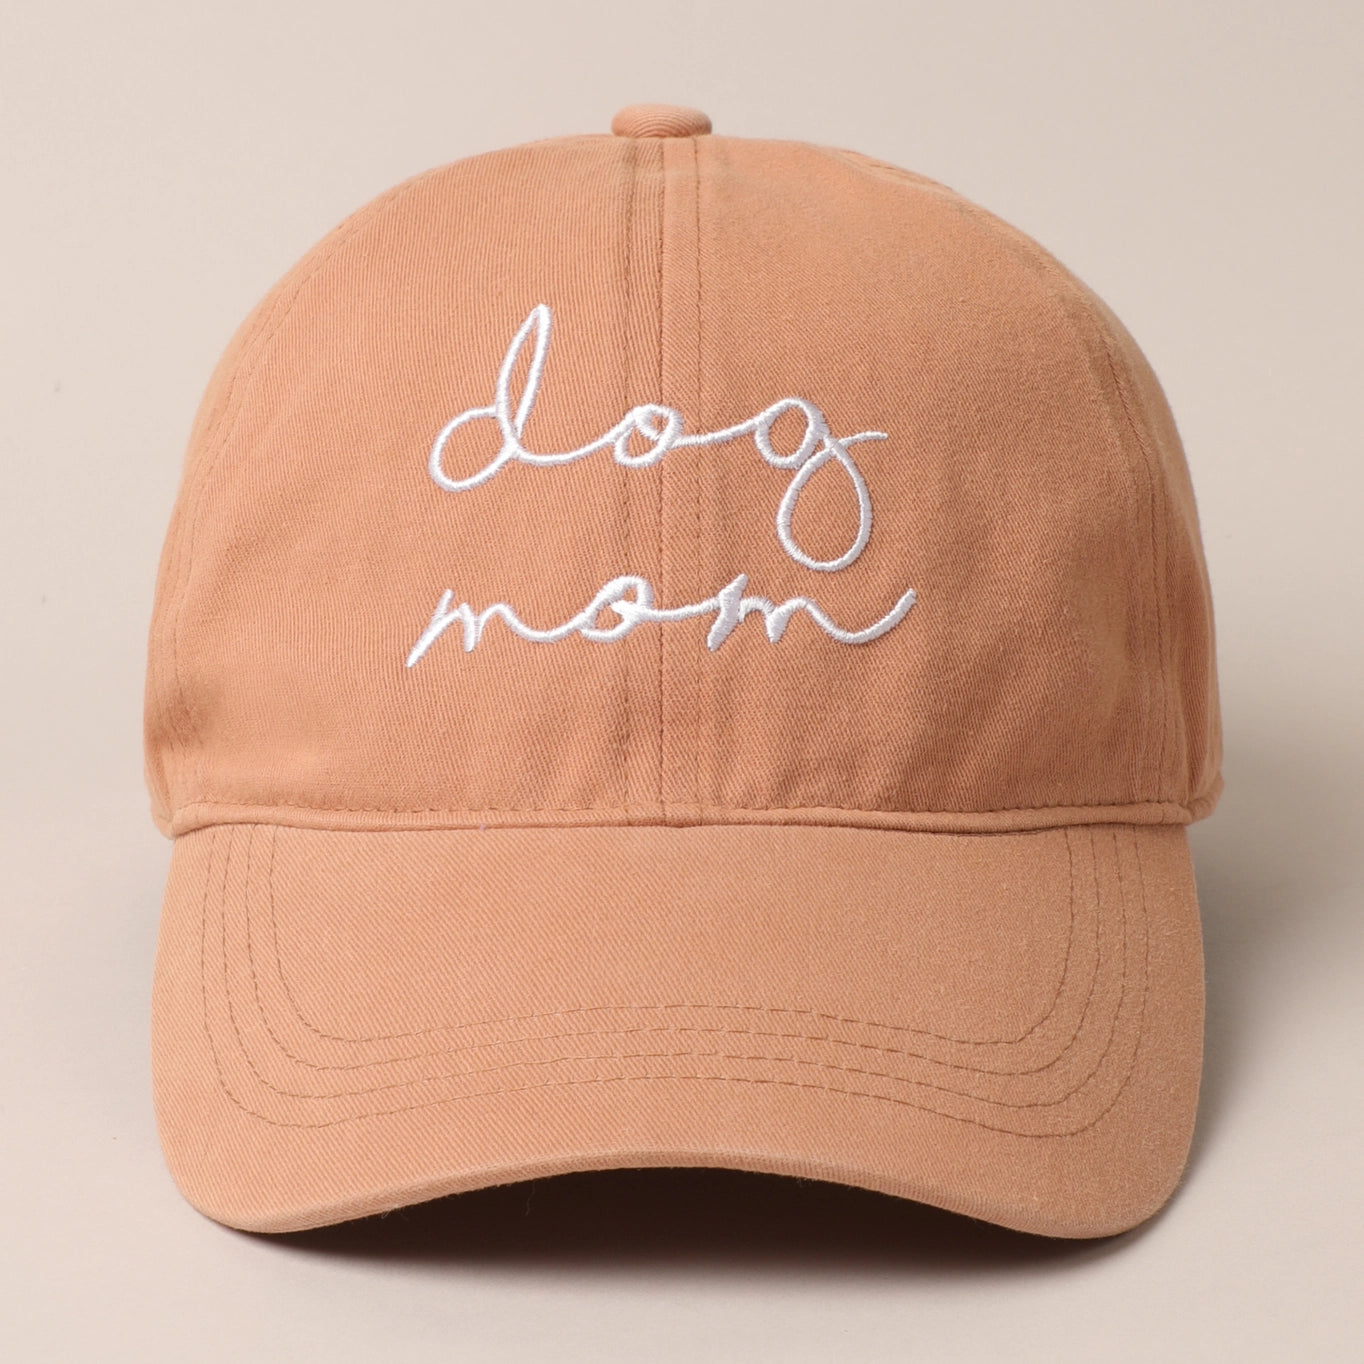 Dog Mom Embroidered Baseball Cap - 2 Colors